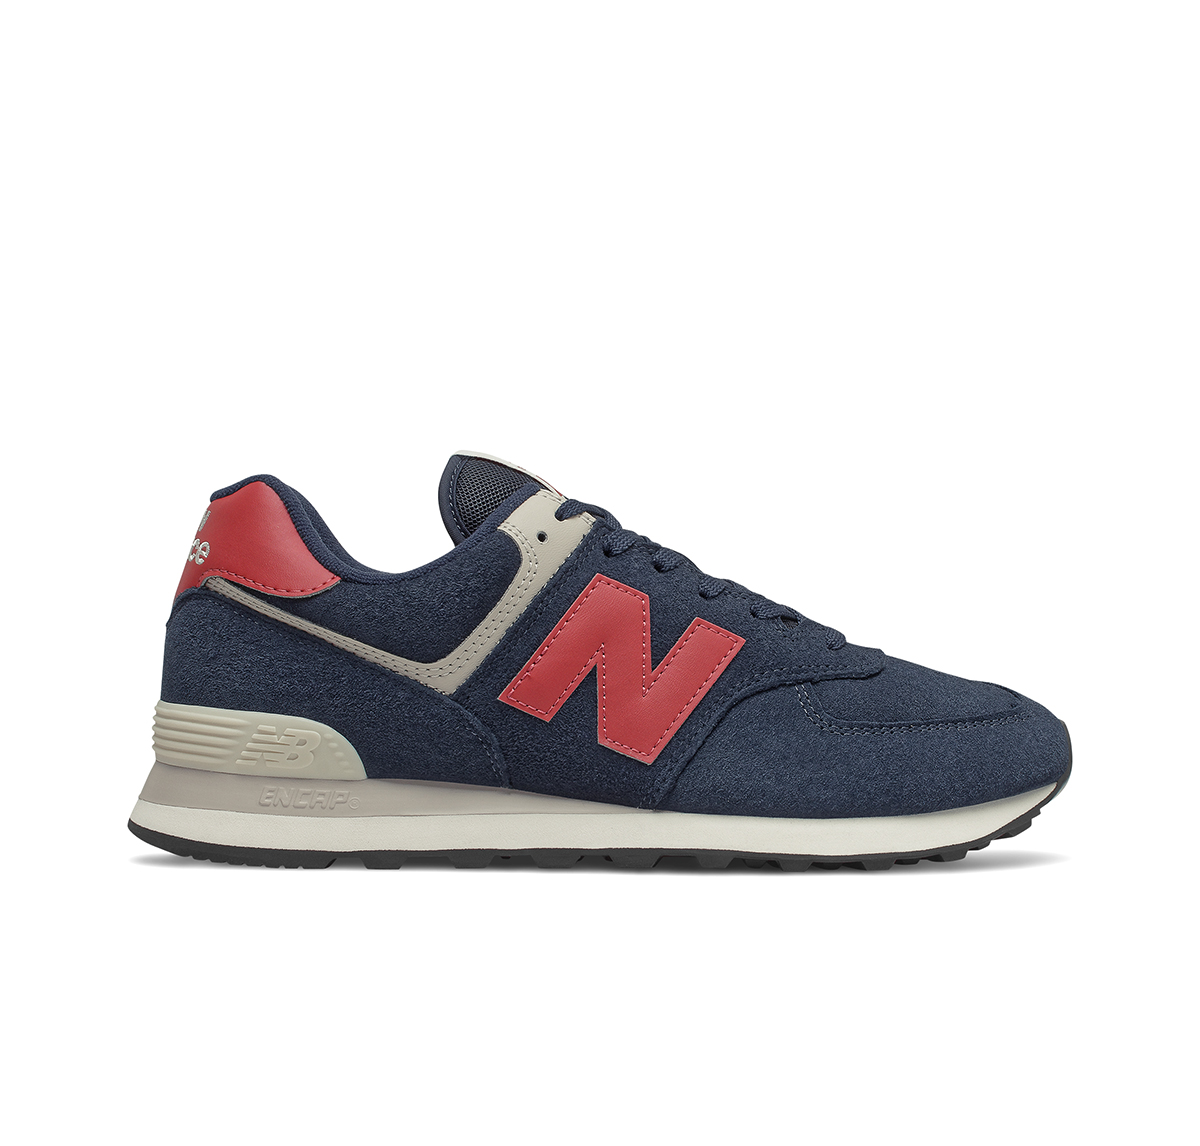 New Balance 574 - Premium Suede - Navy Red right side